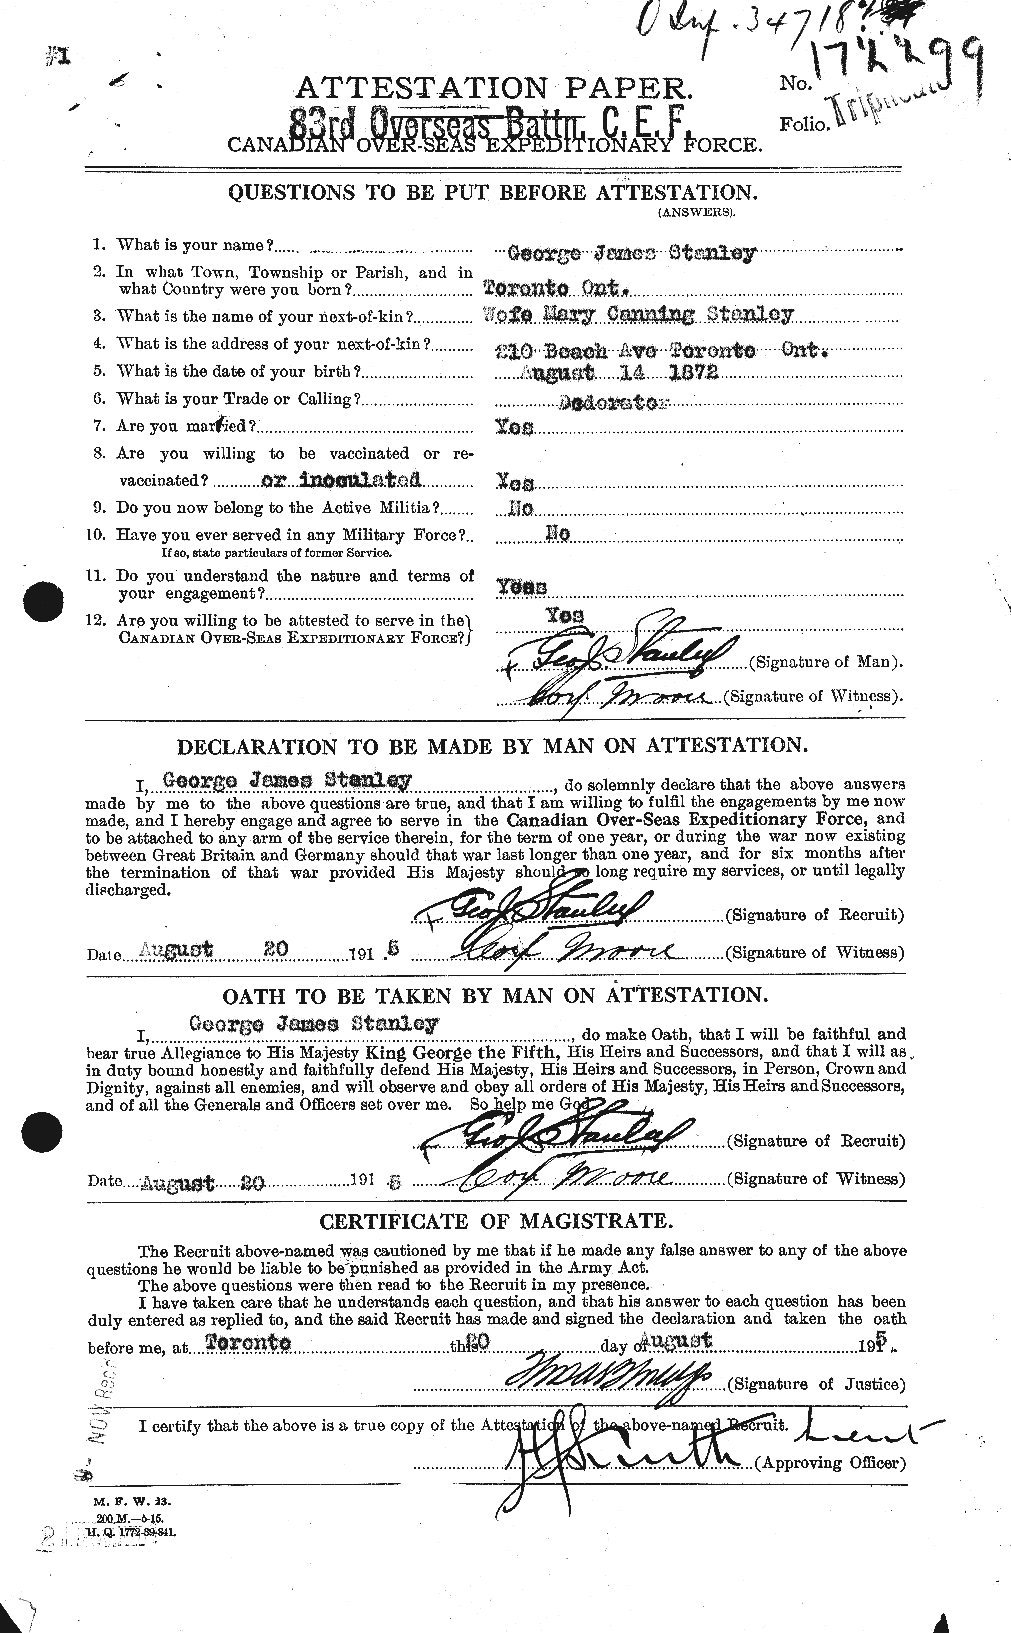 Personnel Records of the First World War - CEF 115107a